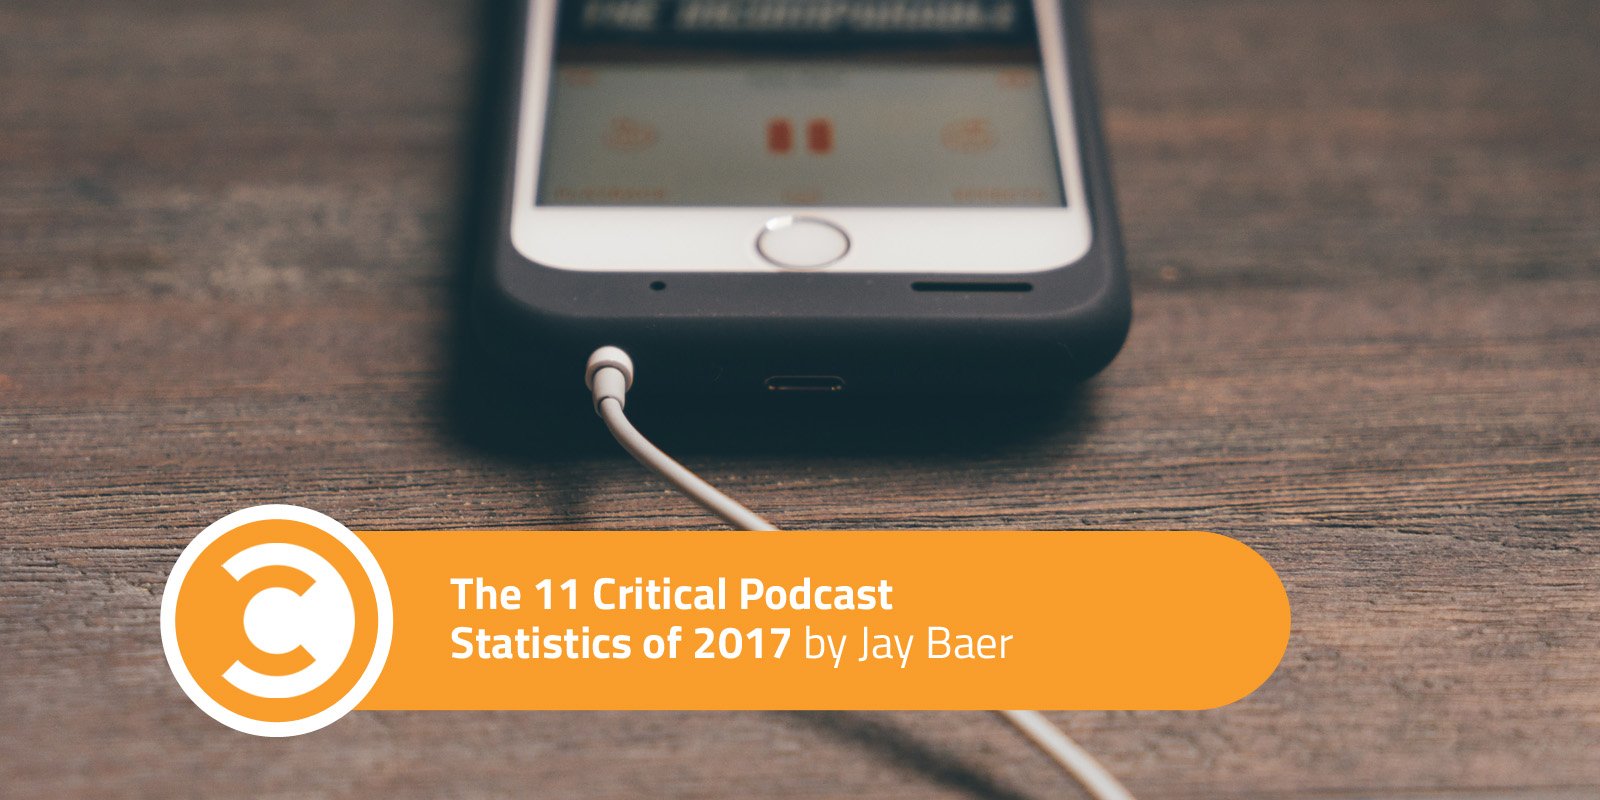 The 11 Critical Podcast Statistics of 2017